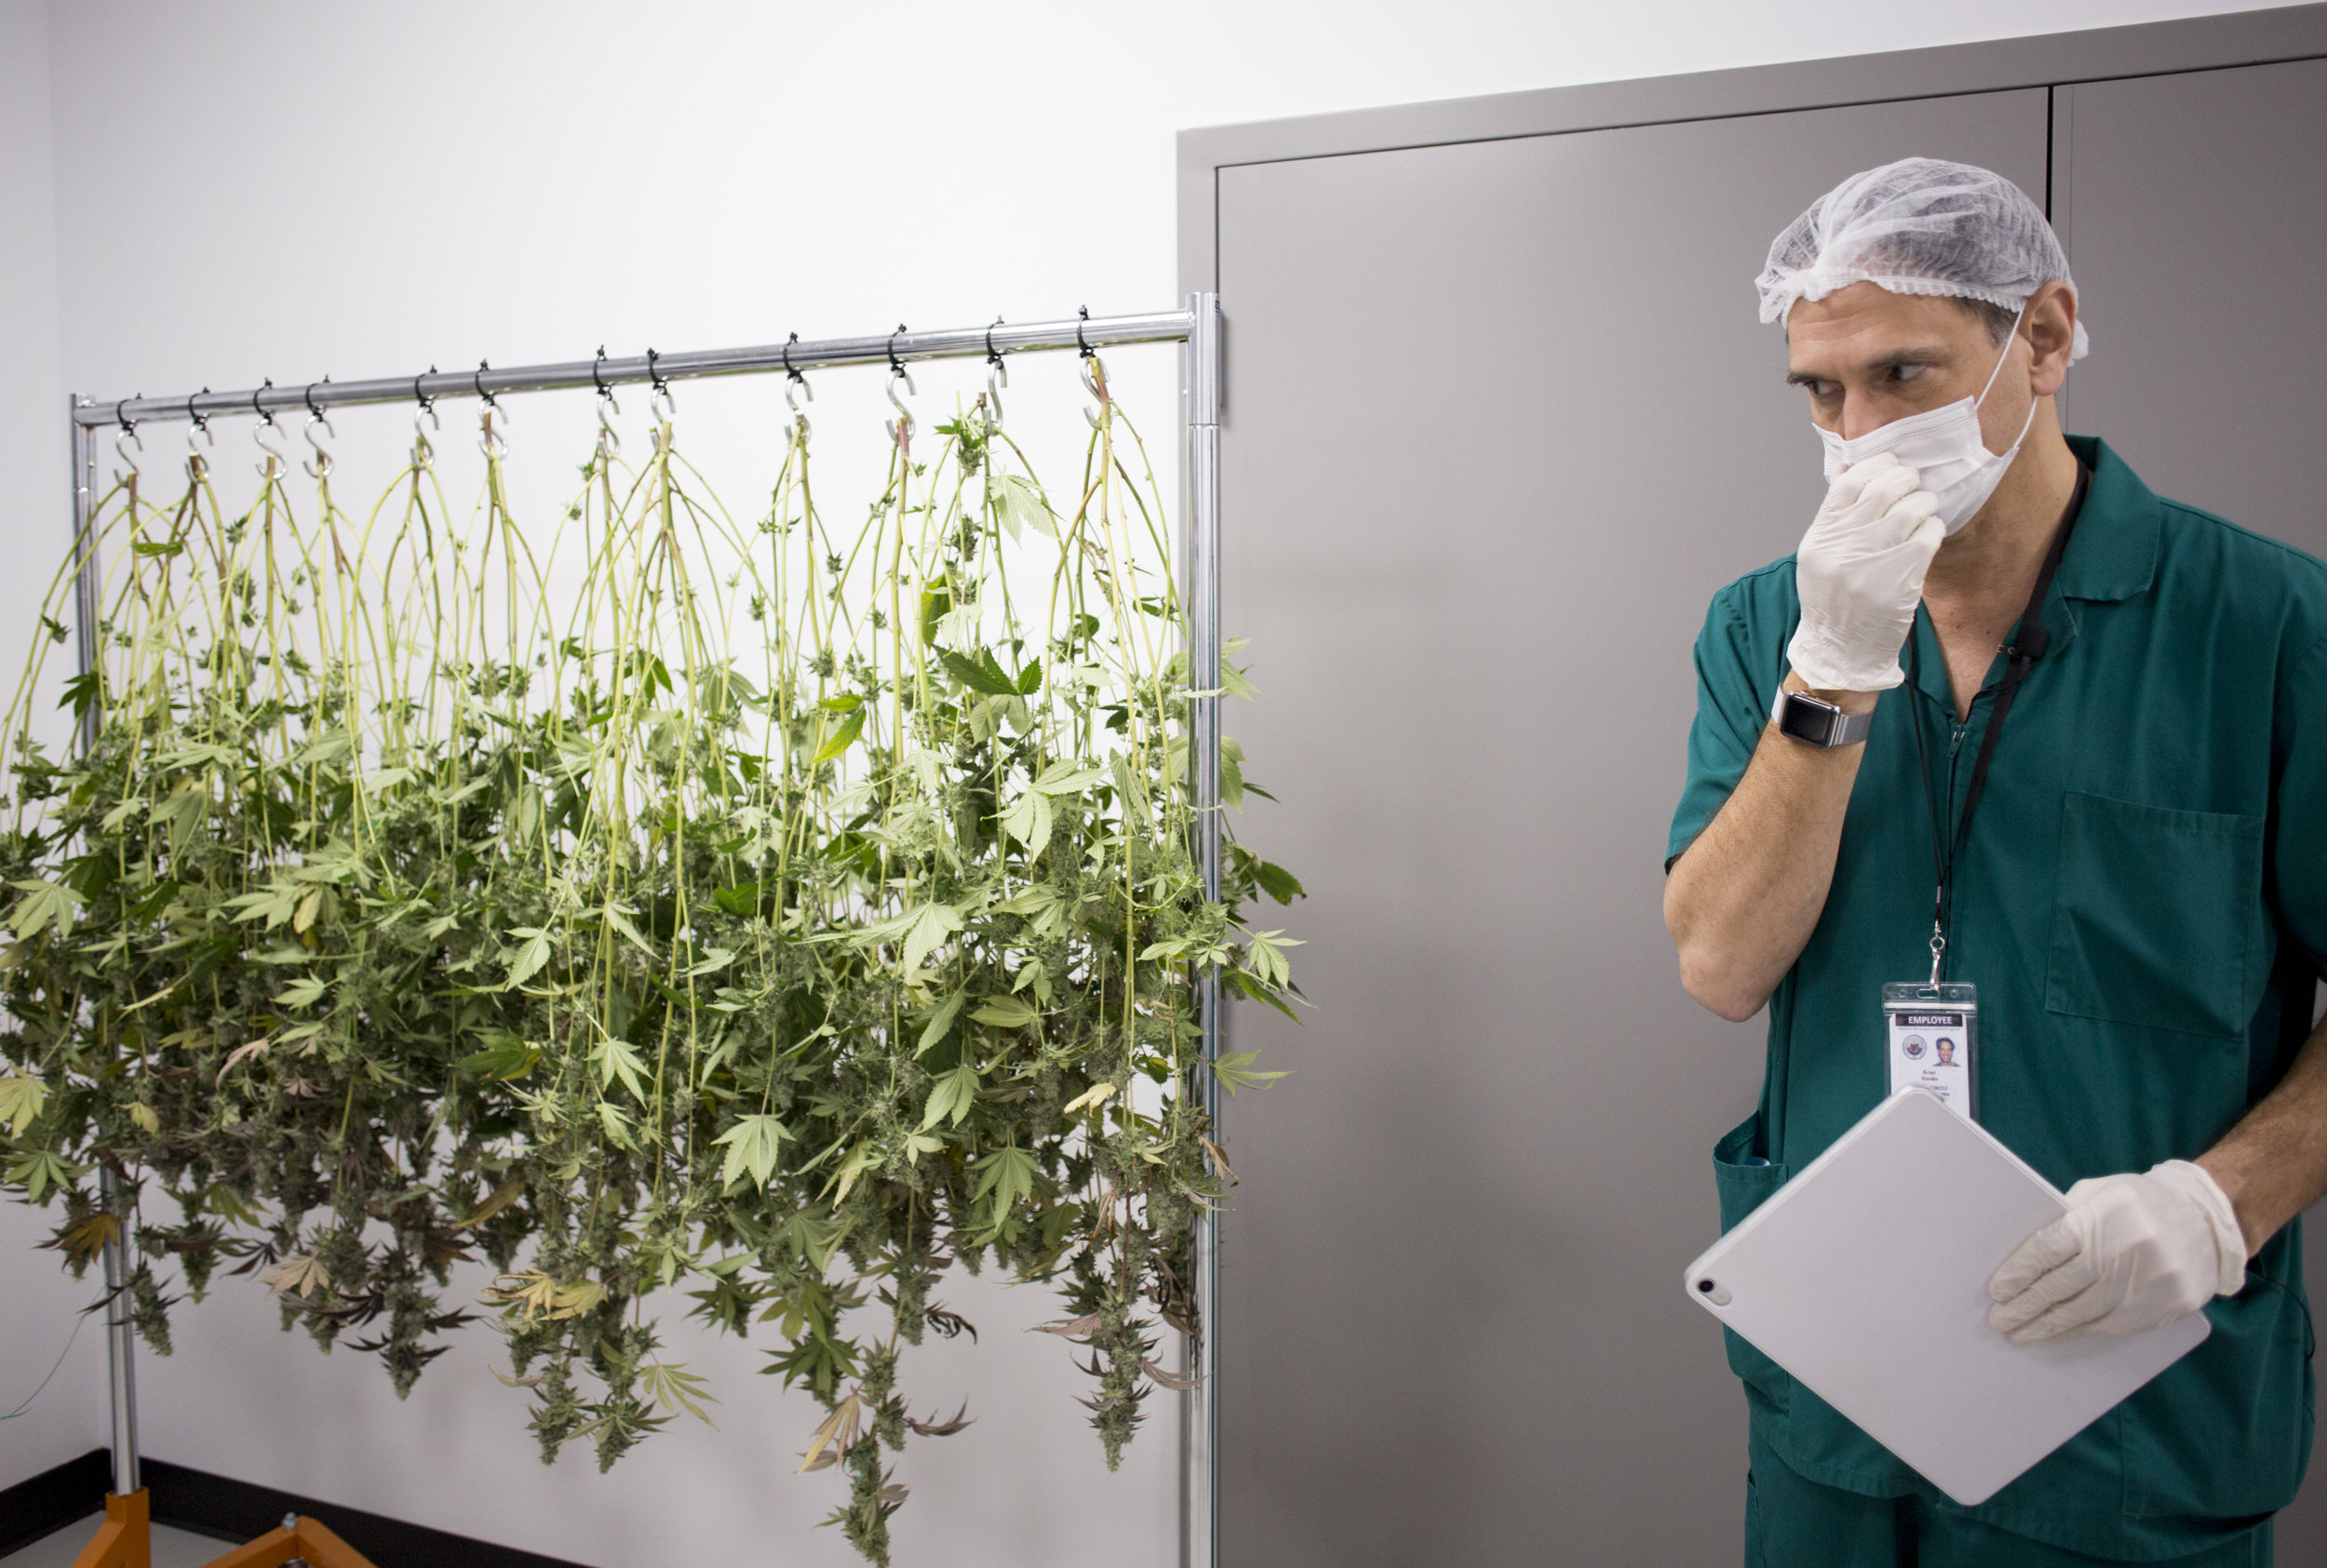  Brian Kessler, the Chairman of the Riviera Creek LLC board, adjusts his face mask as he talks about the marijuana plants that are grown and harvested at Riviera Creek in Youngstown, Ohio on Feb. 14, 2019. 